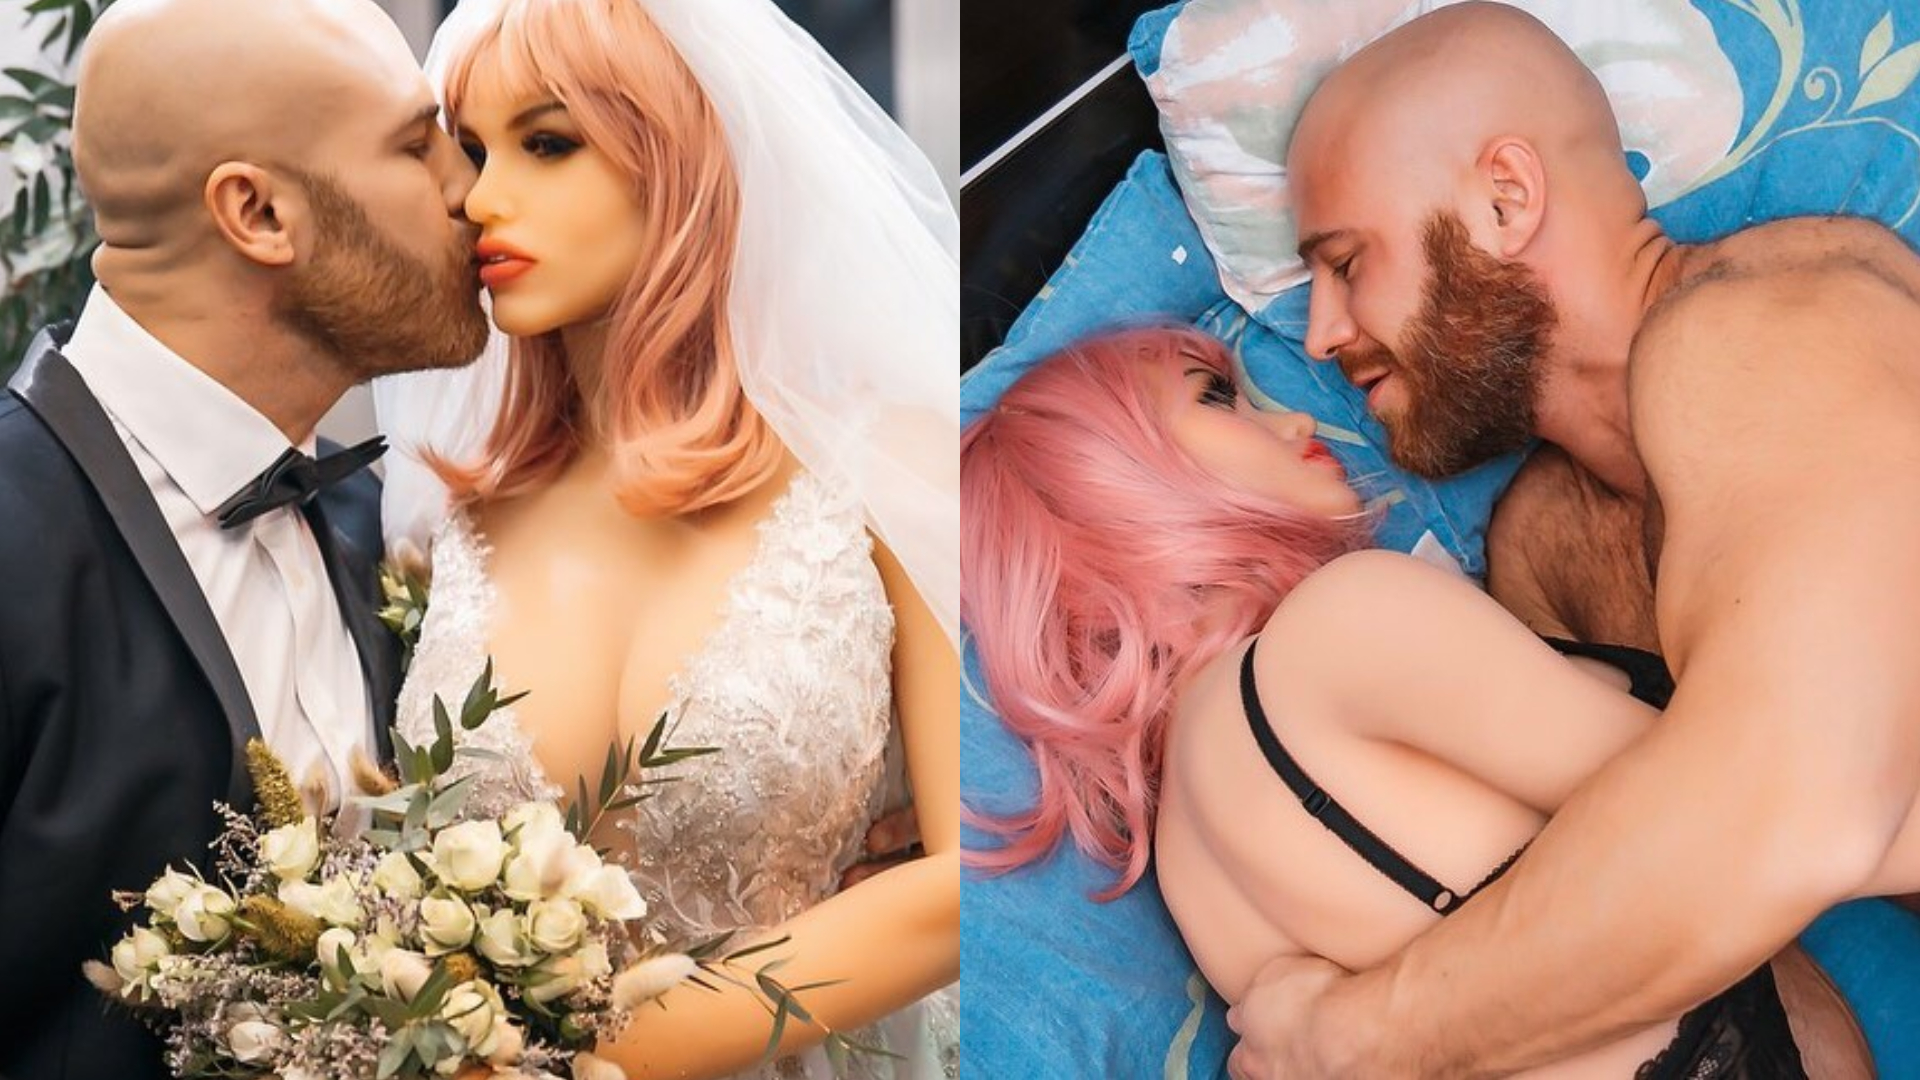 Meet the Man Who Married His Sex Doll image